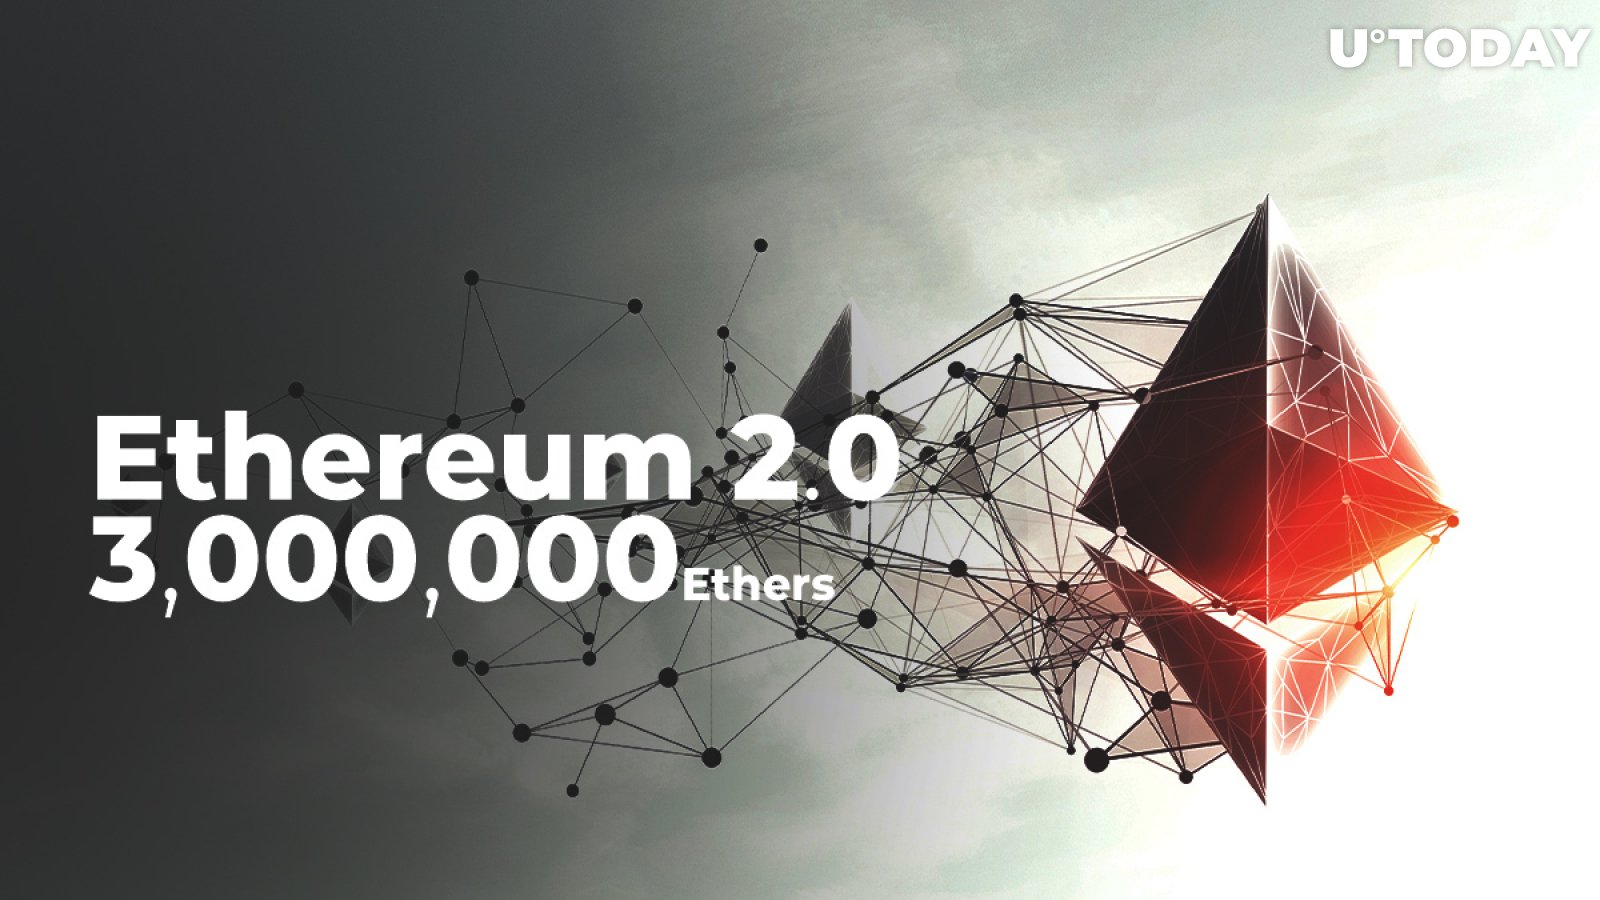 Ethereum (ETH) 2.0 Surpasses 3,000,000 Ethers Staked While ETH Soars Above $1,800